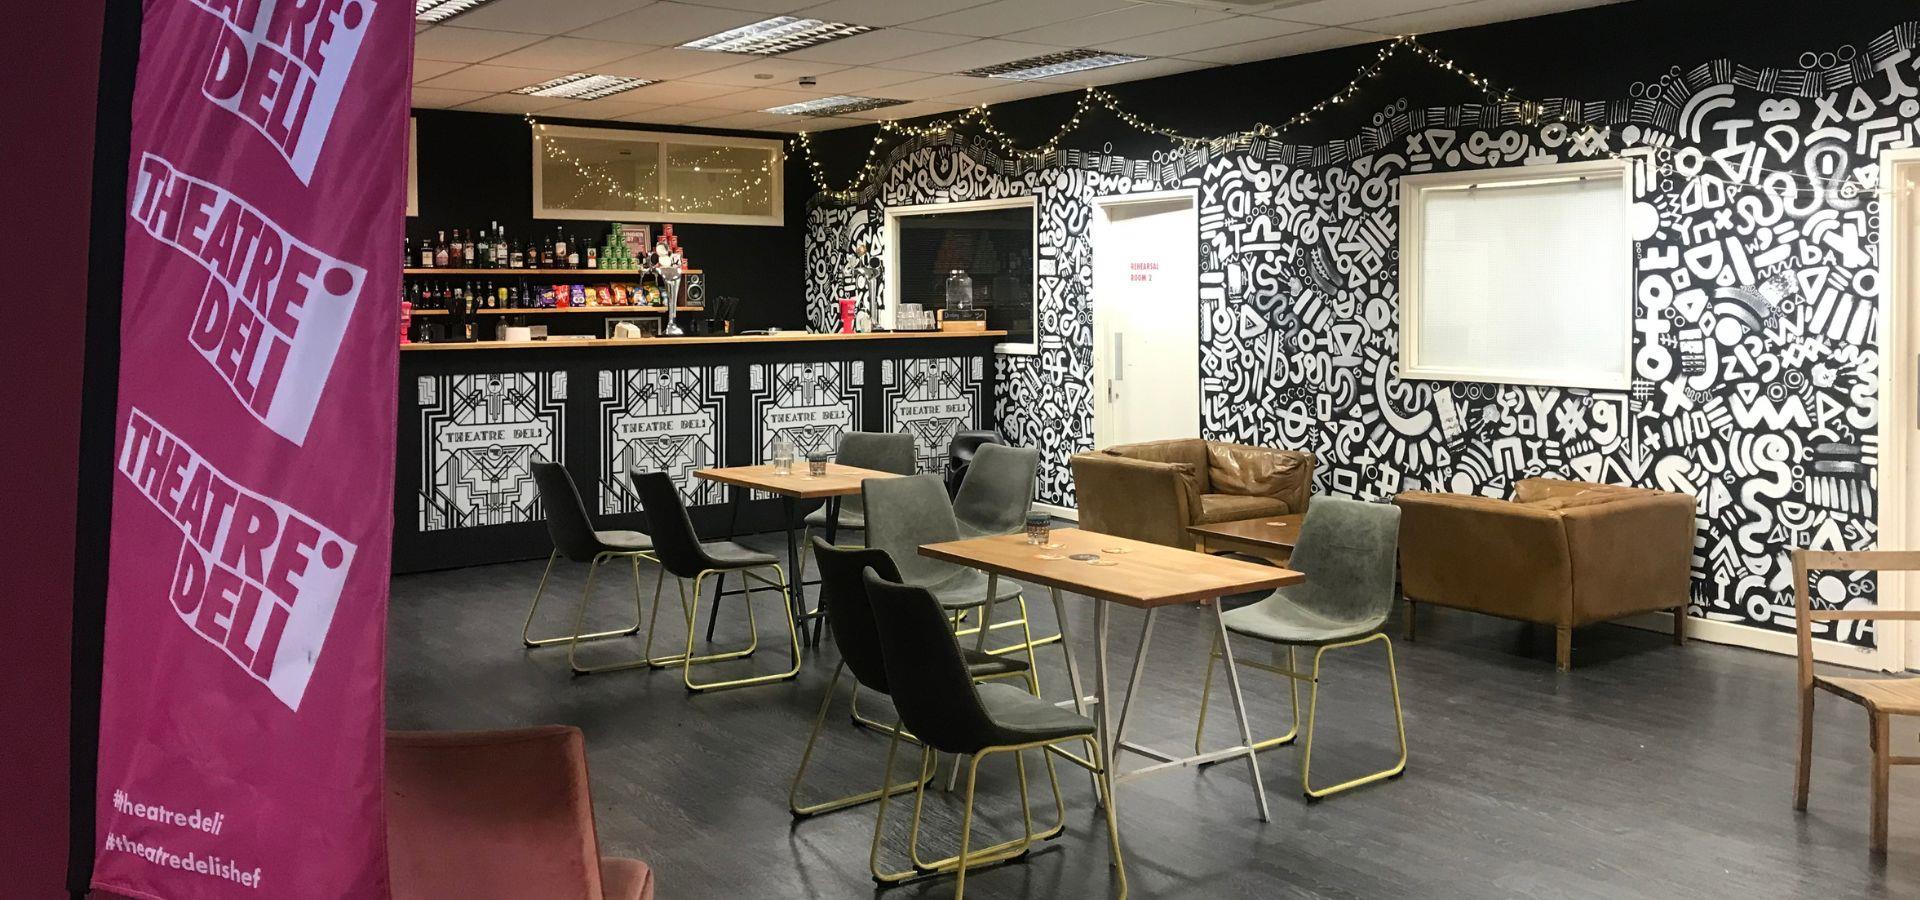 Theatre Deli's bar area with two tables, surrounded by chairs and two arm chairs next to a wall. There is a vibrant black and white mural and fairy lights, along with a flag with the company's logo and social media handles in the foreground.